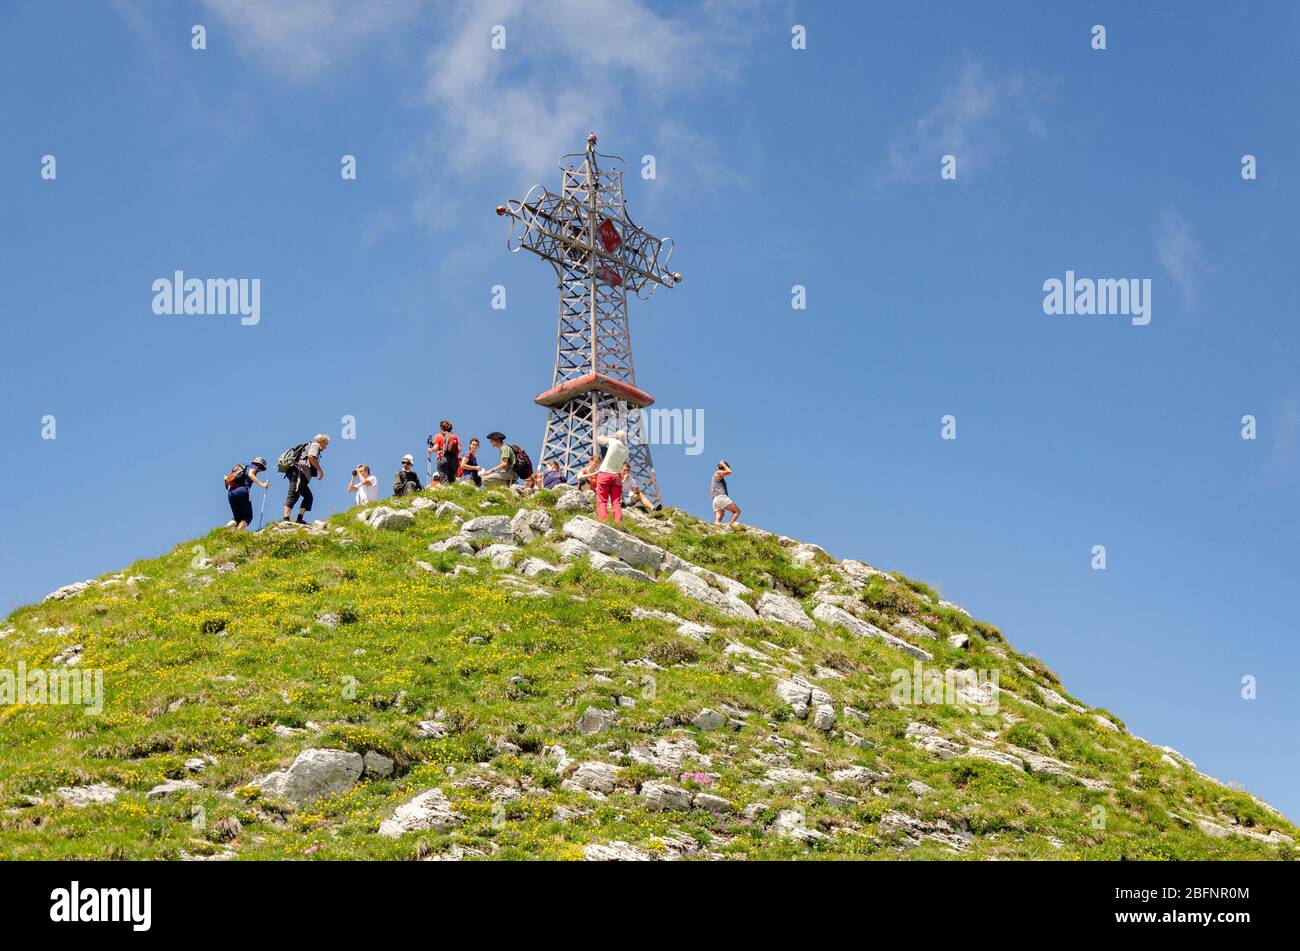 View of hikers and the cross at the summit of Le Reculet on Jura Mountains, France Stock Photo